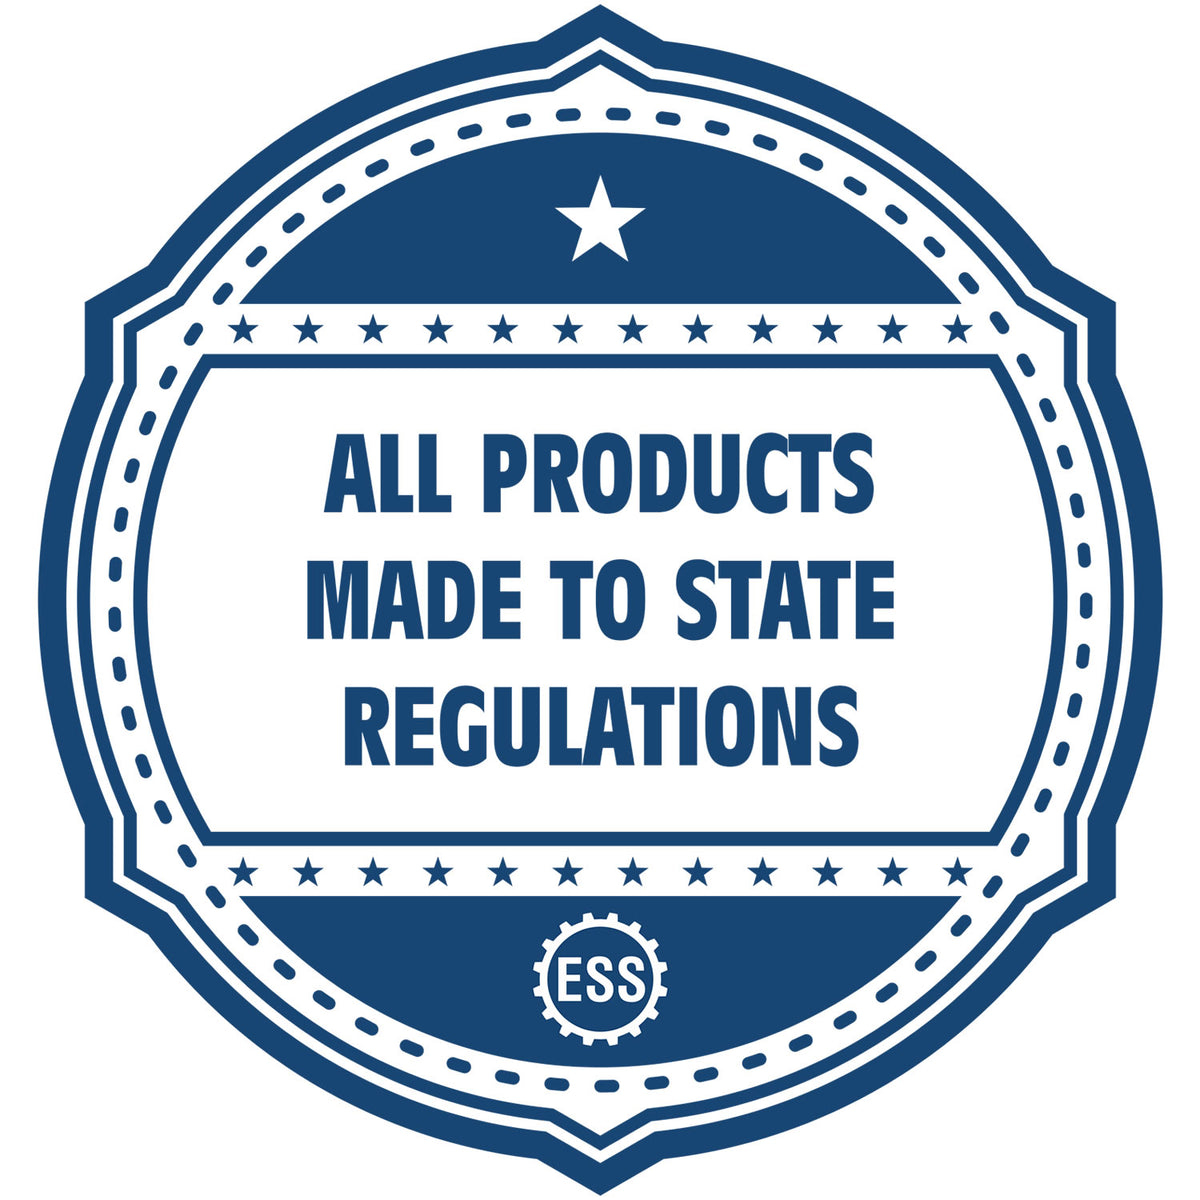 An icon or badge element for the Slim Pre-Inked Maine Professional Engineer Seal Stamp showing that this product is made in compliance with state regulations.